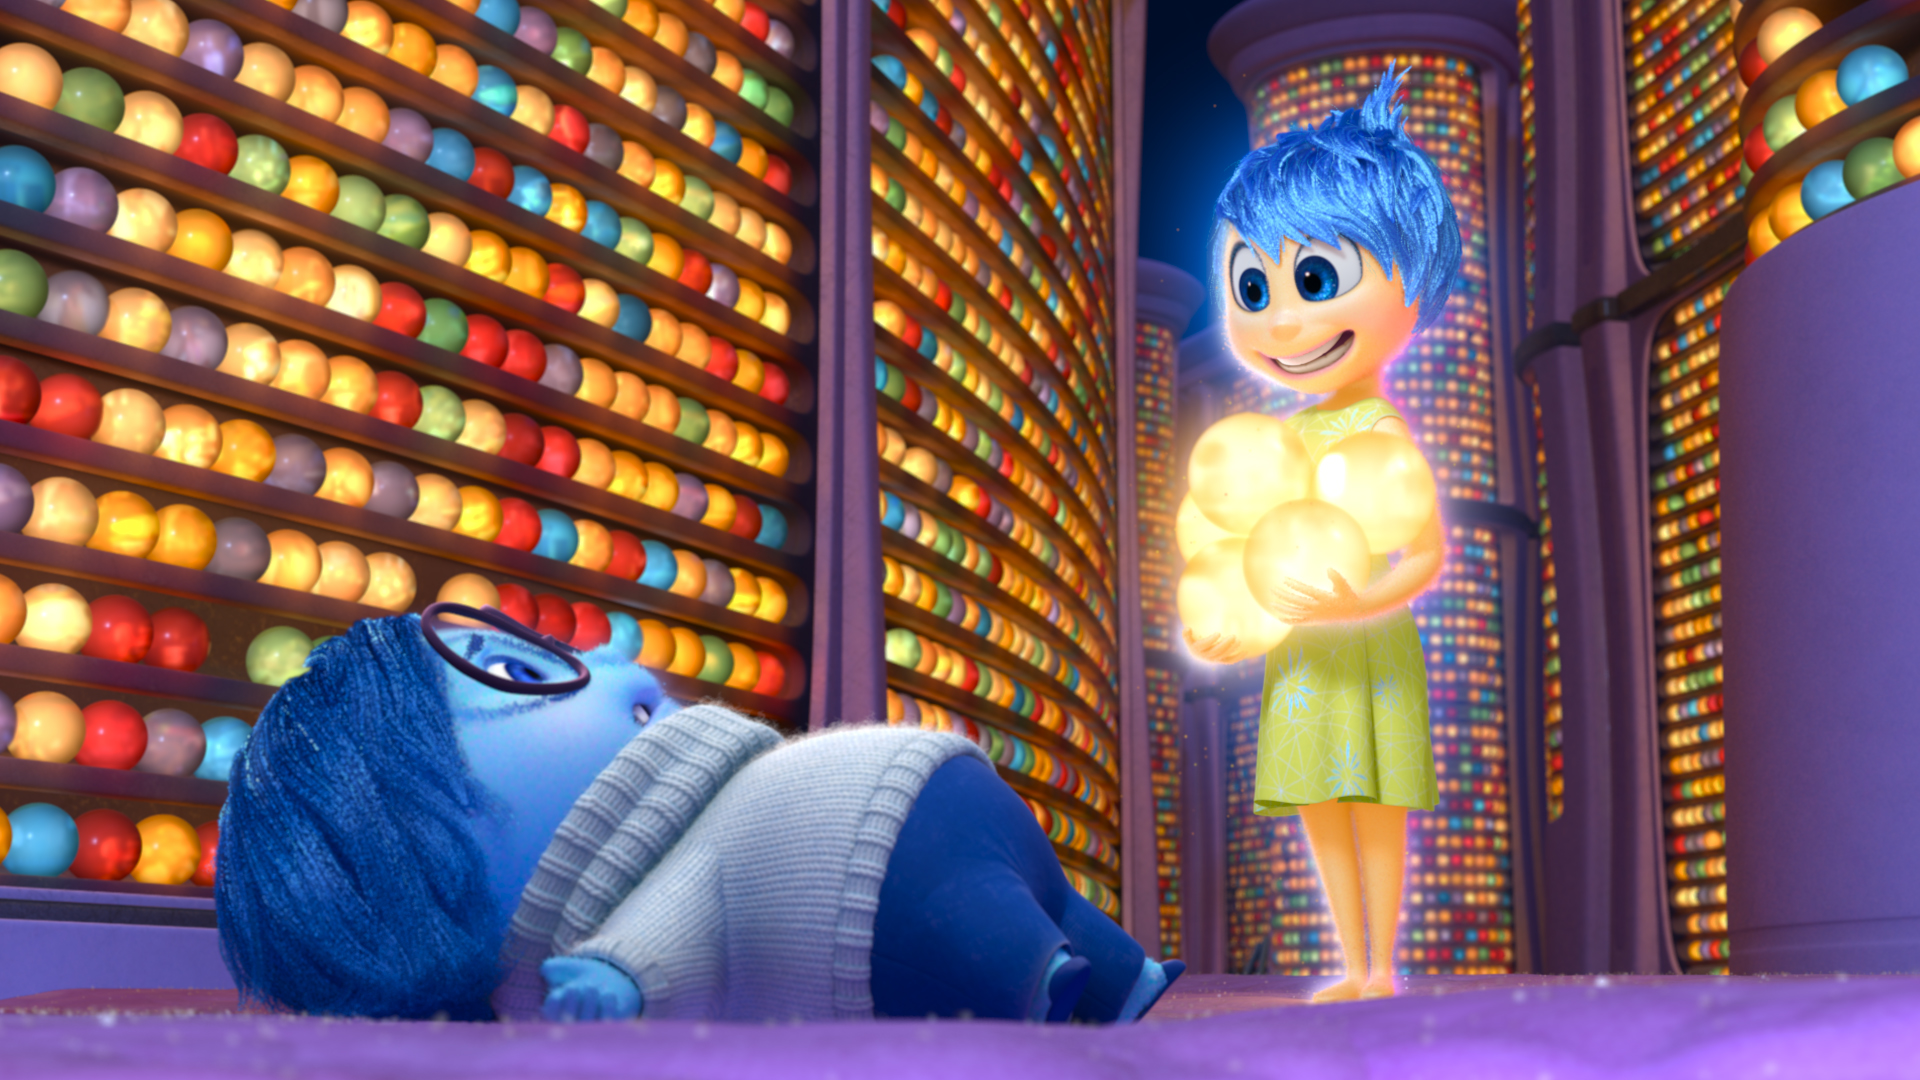 INSIDE OUT - Pictured (L-R): Sadness, Joy. 2015 Disney Pixar. All Rights Reserved.